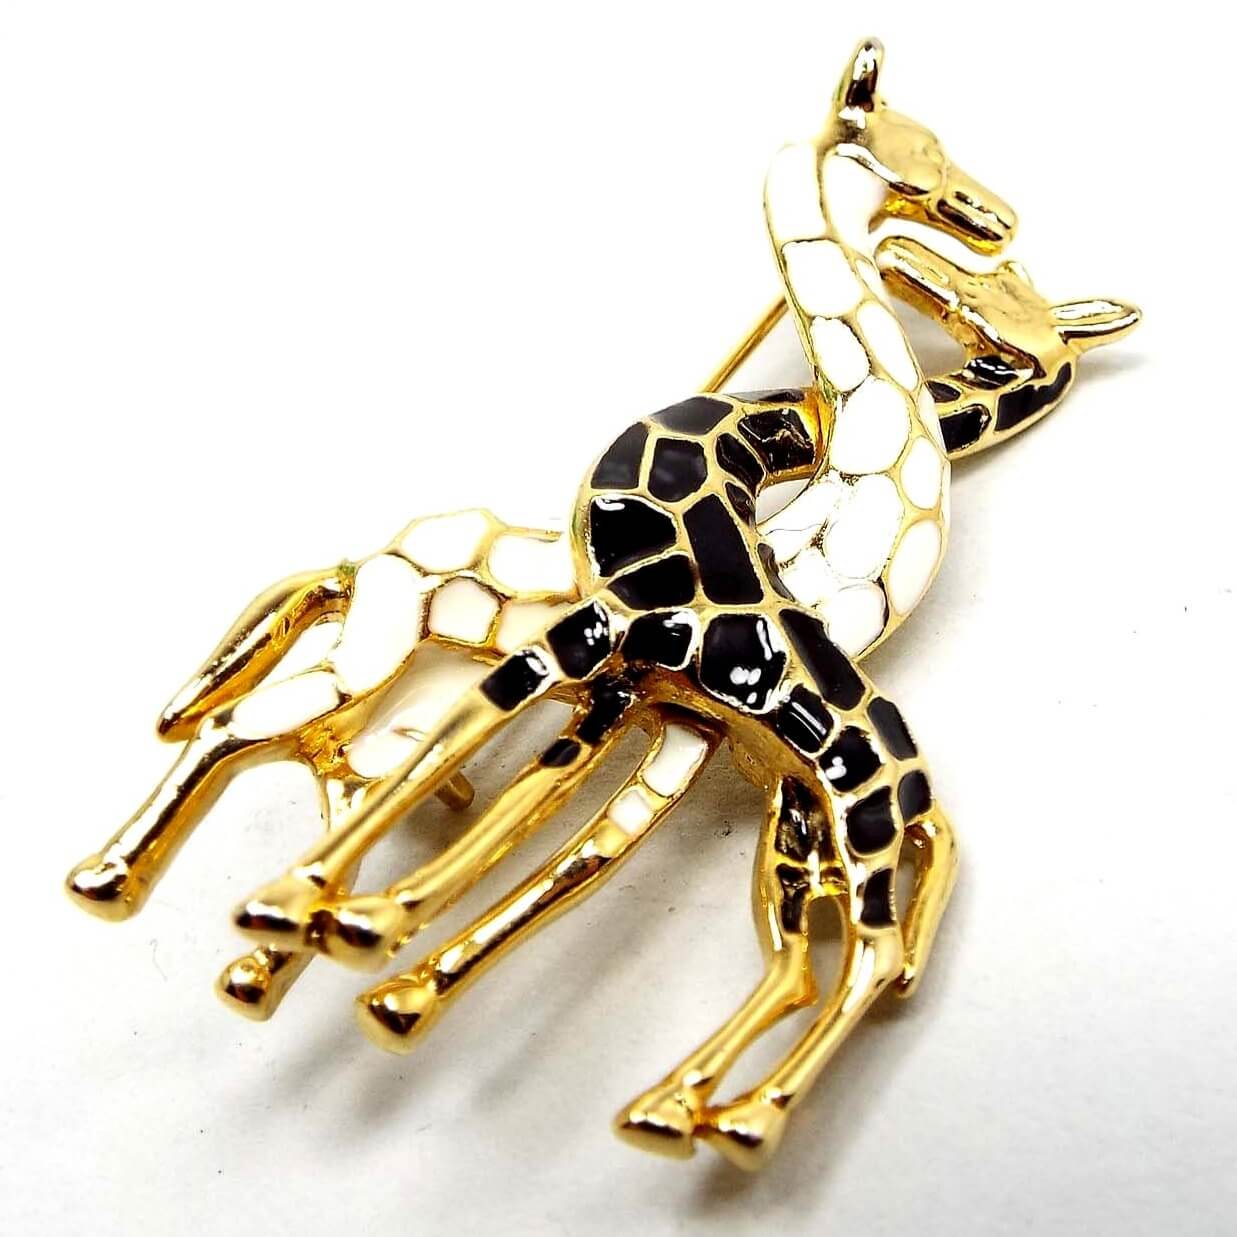 Front view of the retro vintage giraffe brooch. the metal is gold tone in color. There are two giraffes with their necks intertwined. One has white enameled spots and the other has black enameled spots.